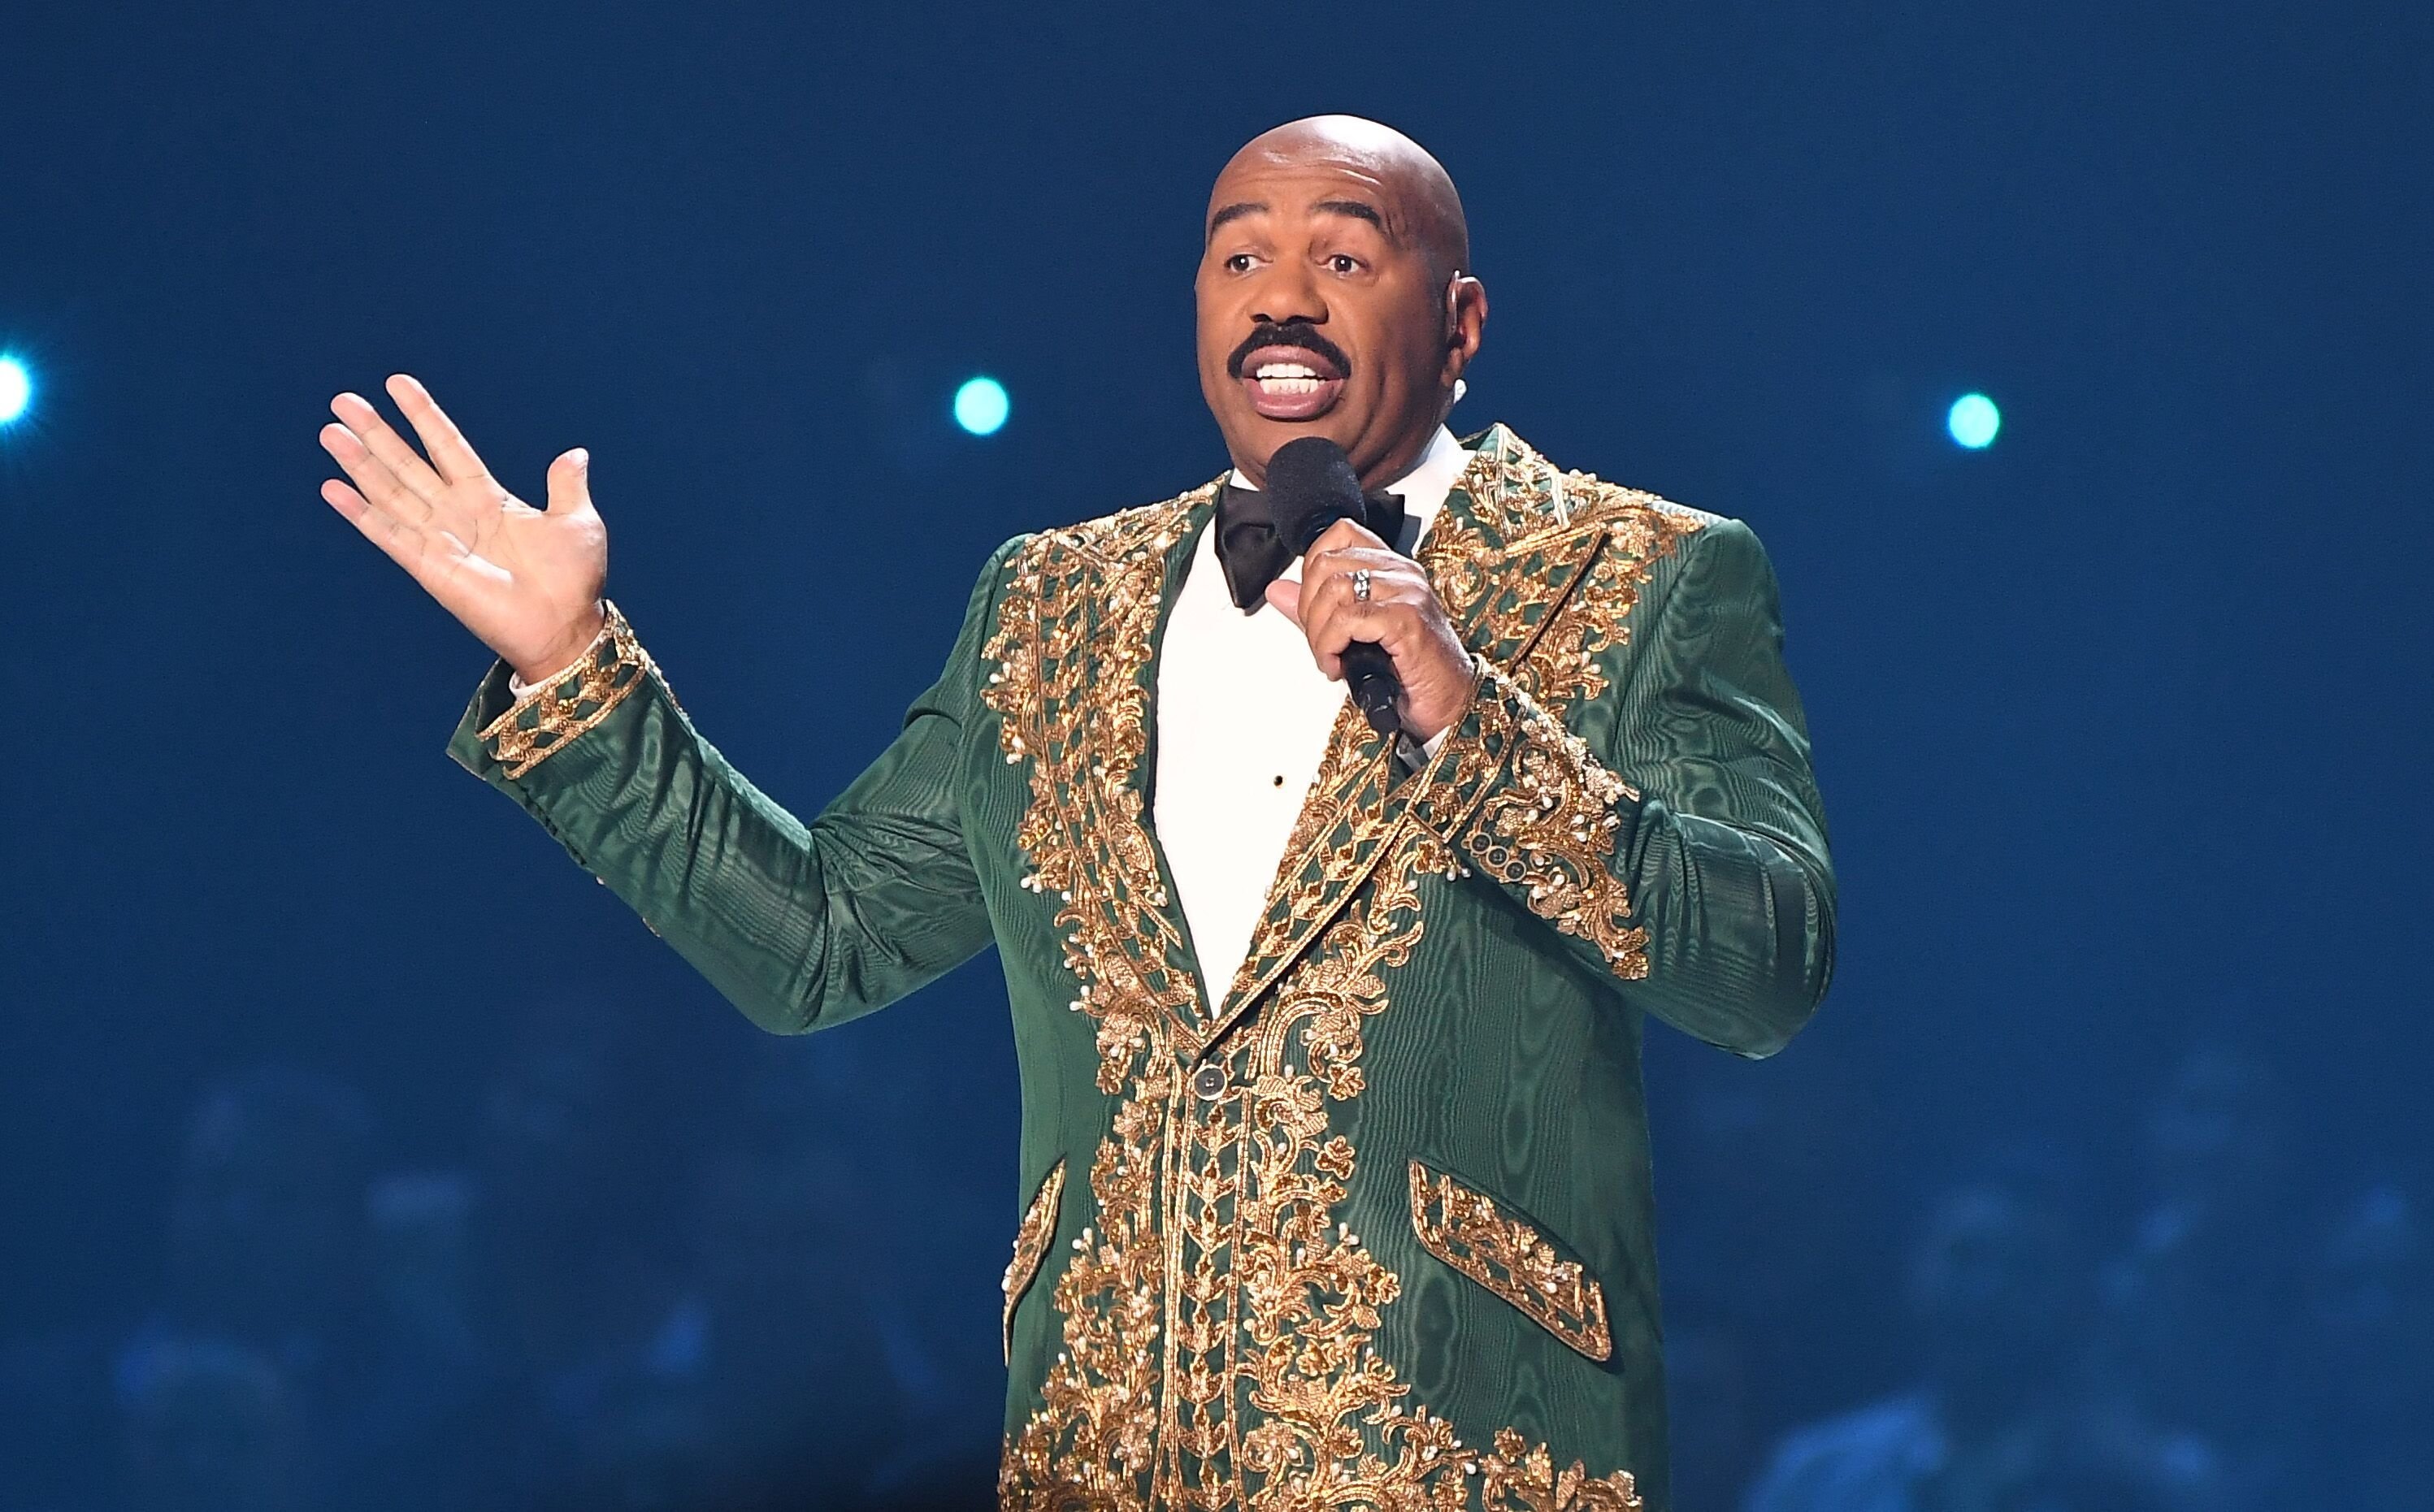 Steve Harvey hosting the Miss Universe Pageant on December 8, 2019 Photo Getty Images